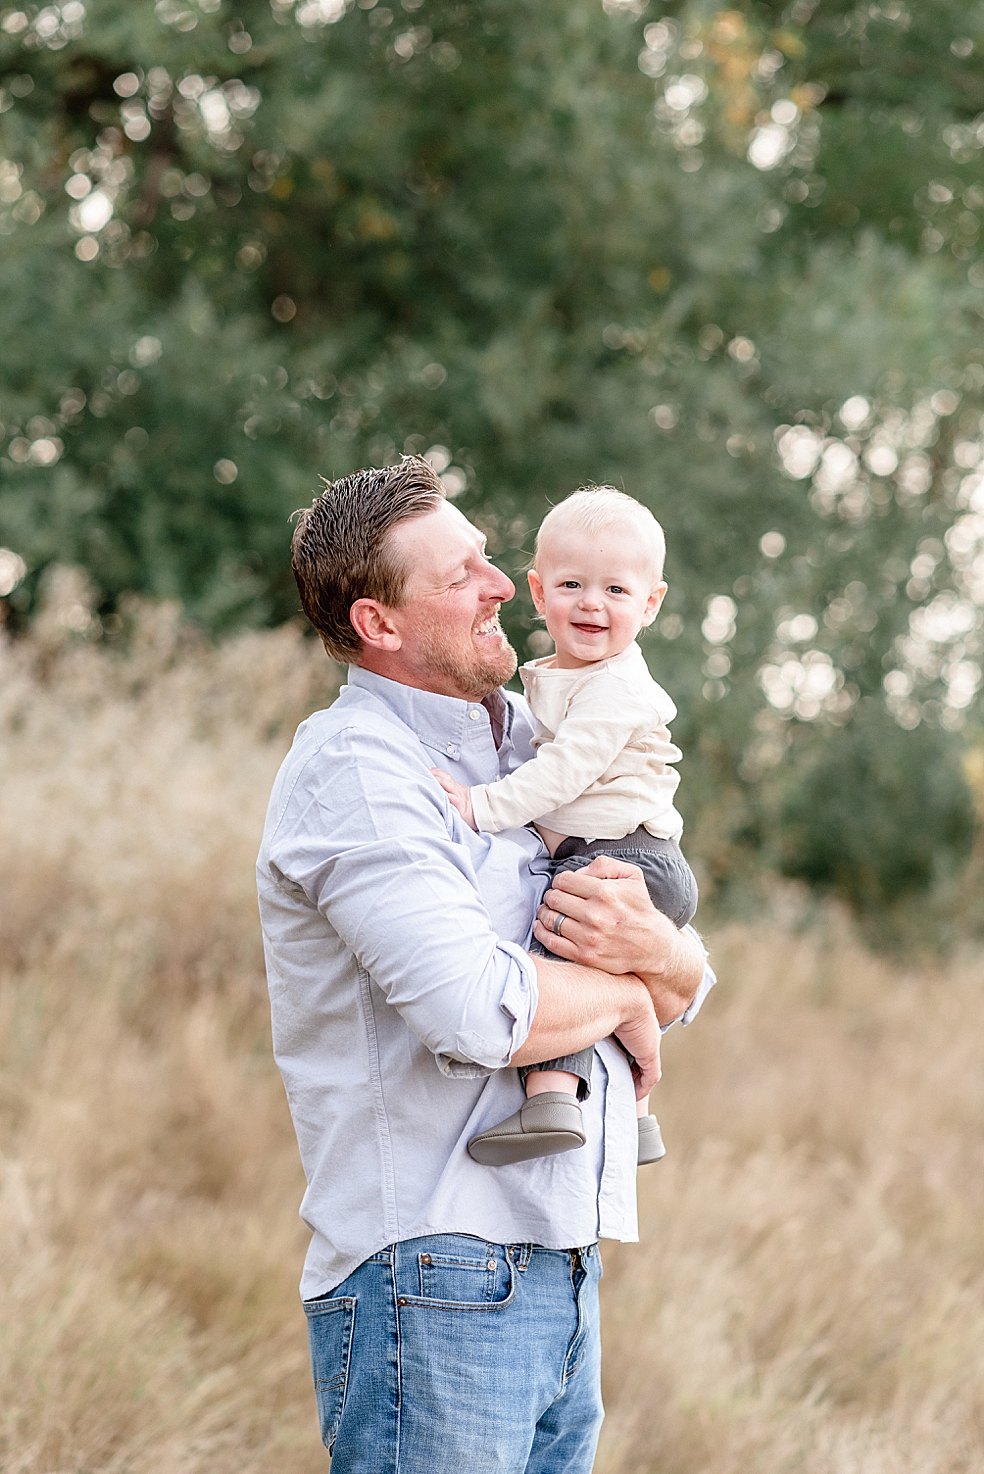 Dad and toddler boy smiling | Photo by Madison Alabama Baby Photographer Jessica Lee 